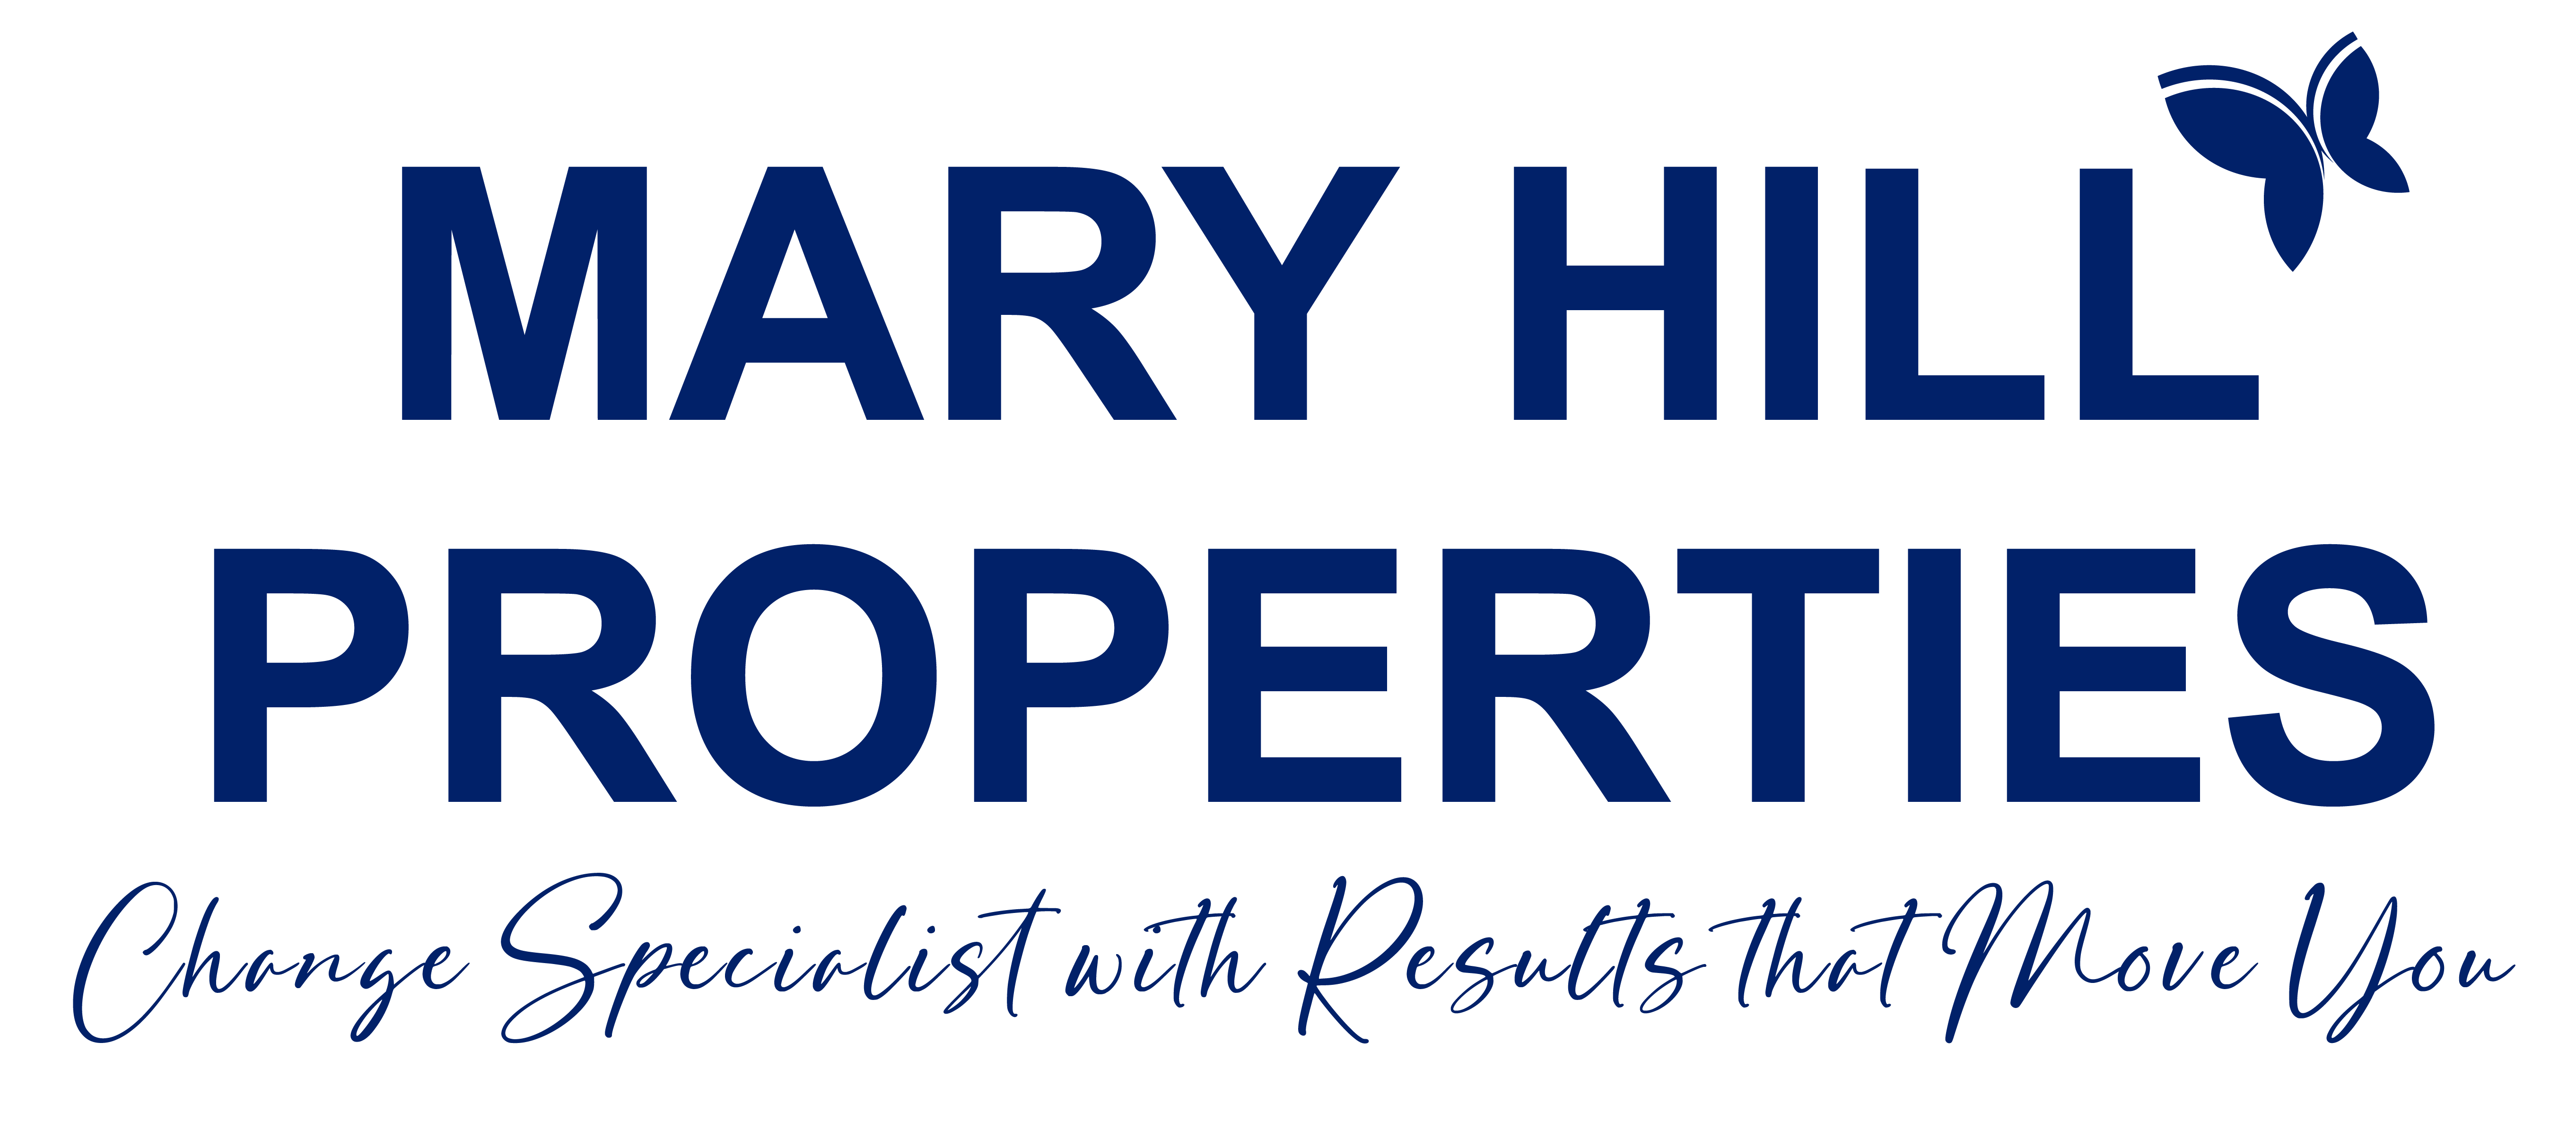 MARY HILL PROPERTIES